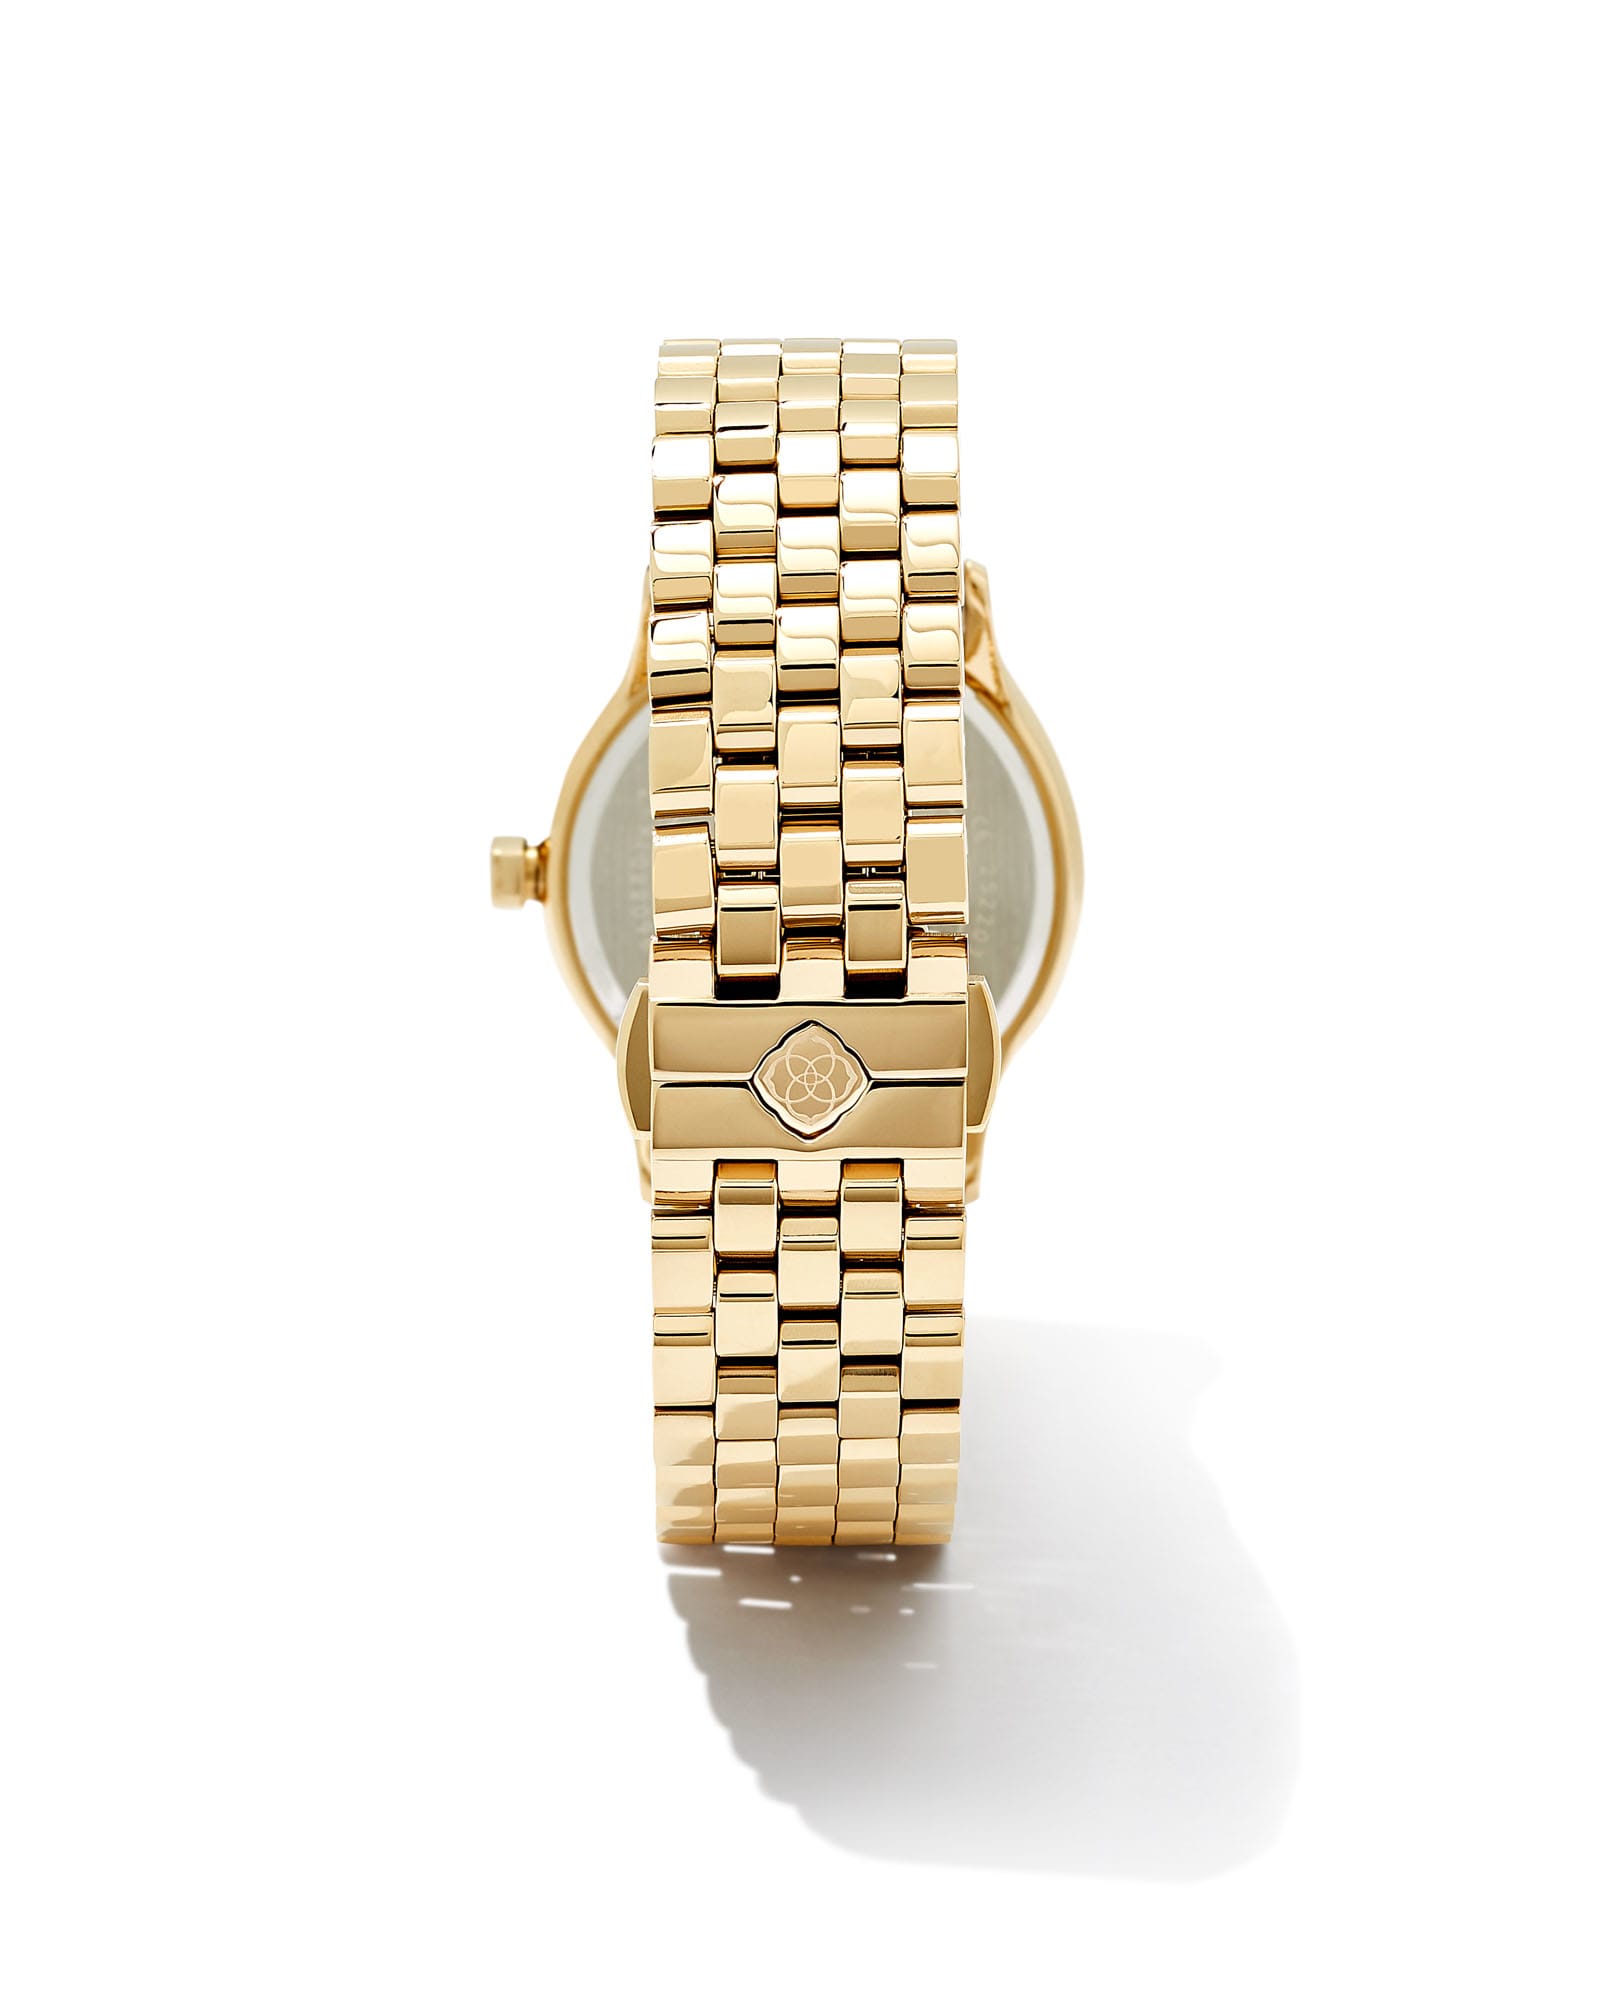 Alex Gold Tone Stainless Steel 35mm Watch in Light Iridescent Sunray